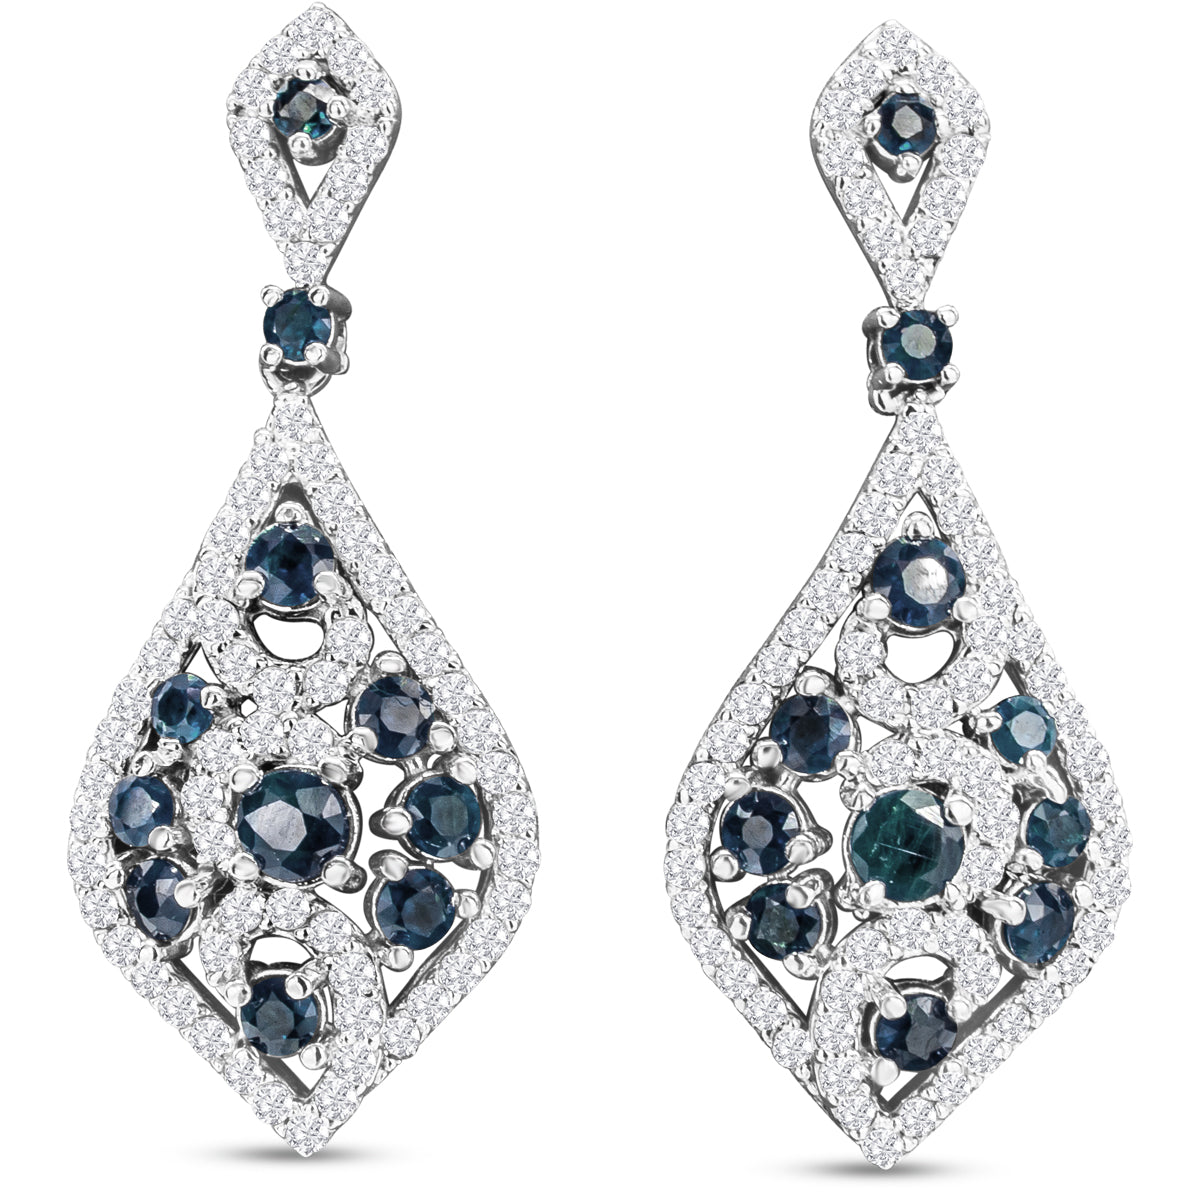 Sselects 2 Carat Sapphire And Diamond Drop Earrings In 14 Karat White I-j, I1-i2 In Gold